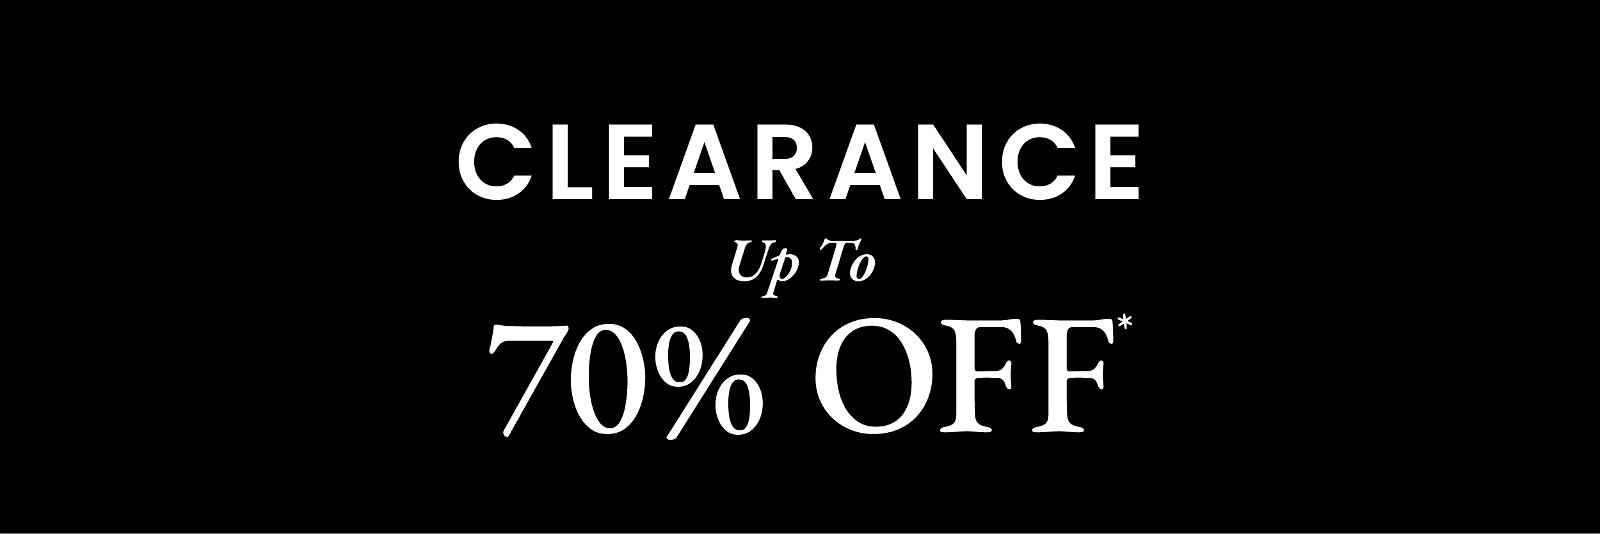 clearance up to 70% off